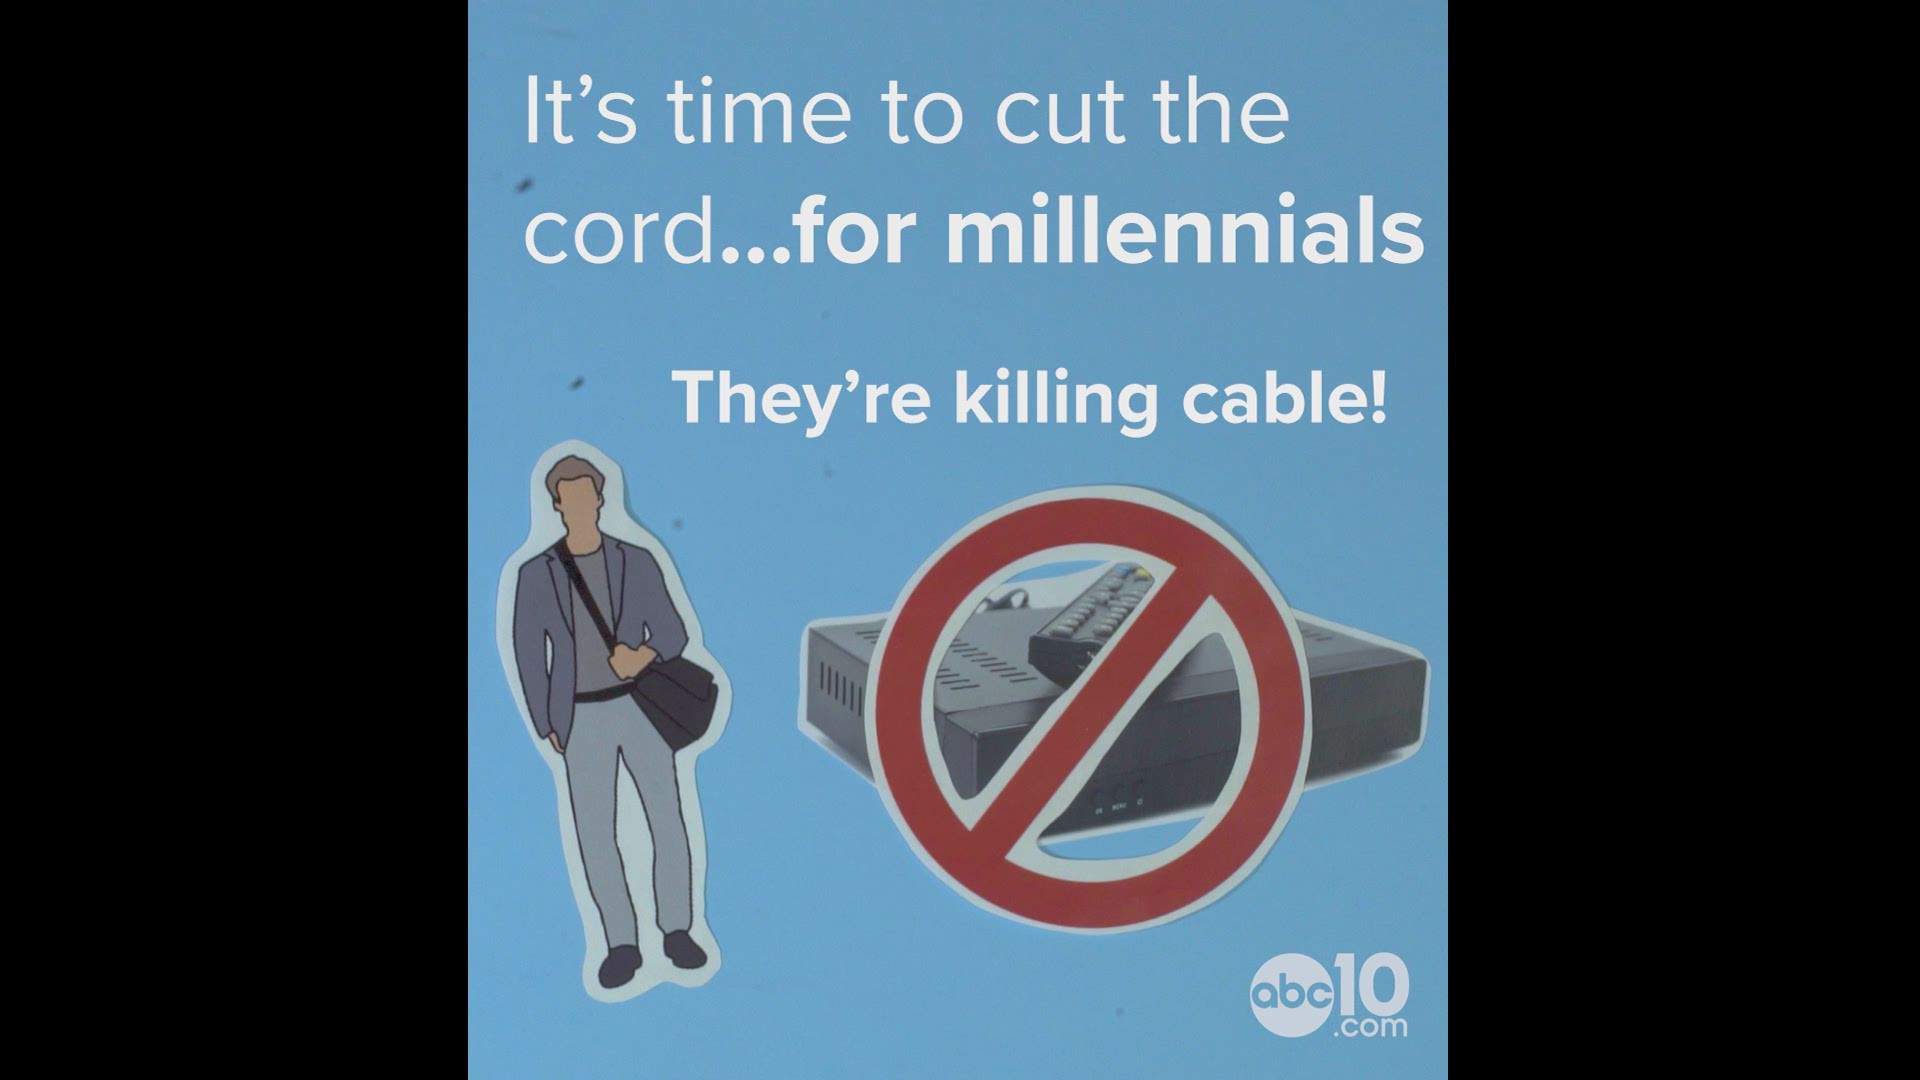 Streaming subscriptions are up and cable subscriptions are down, but millennials are still watching live TV.